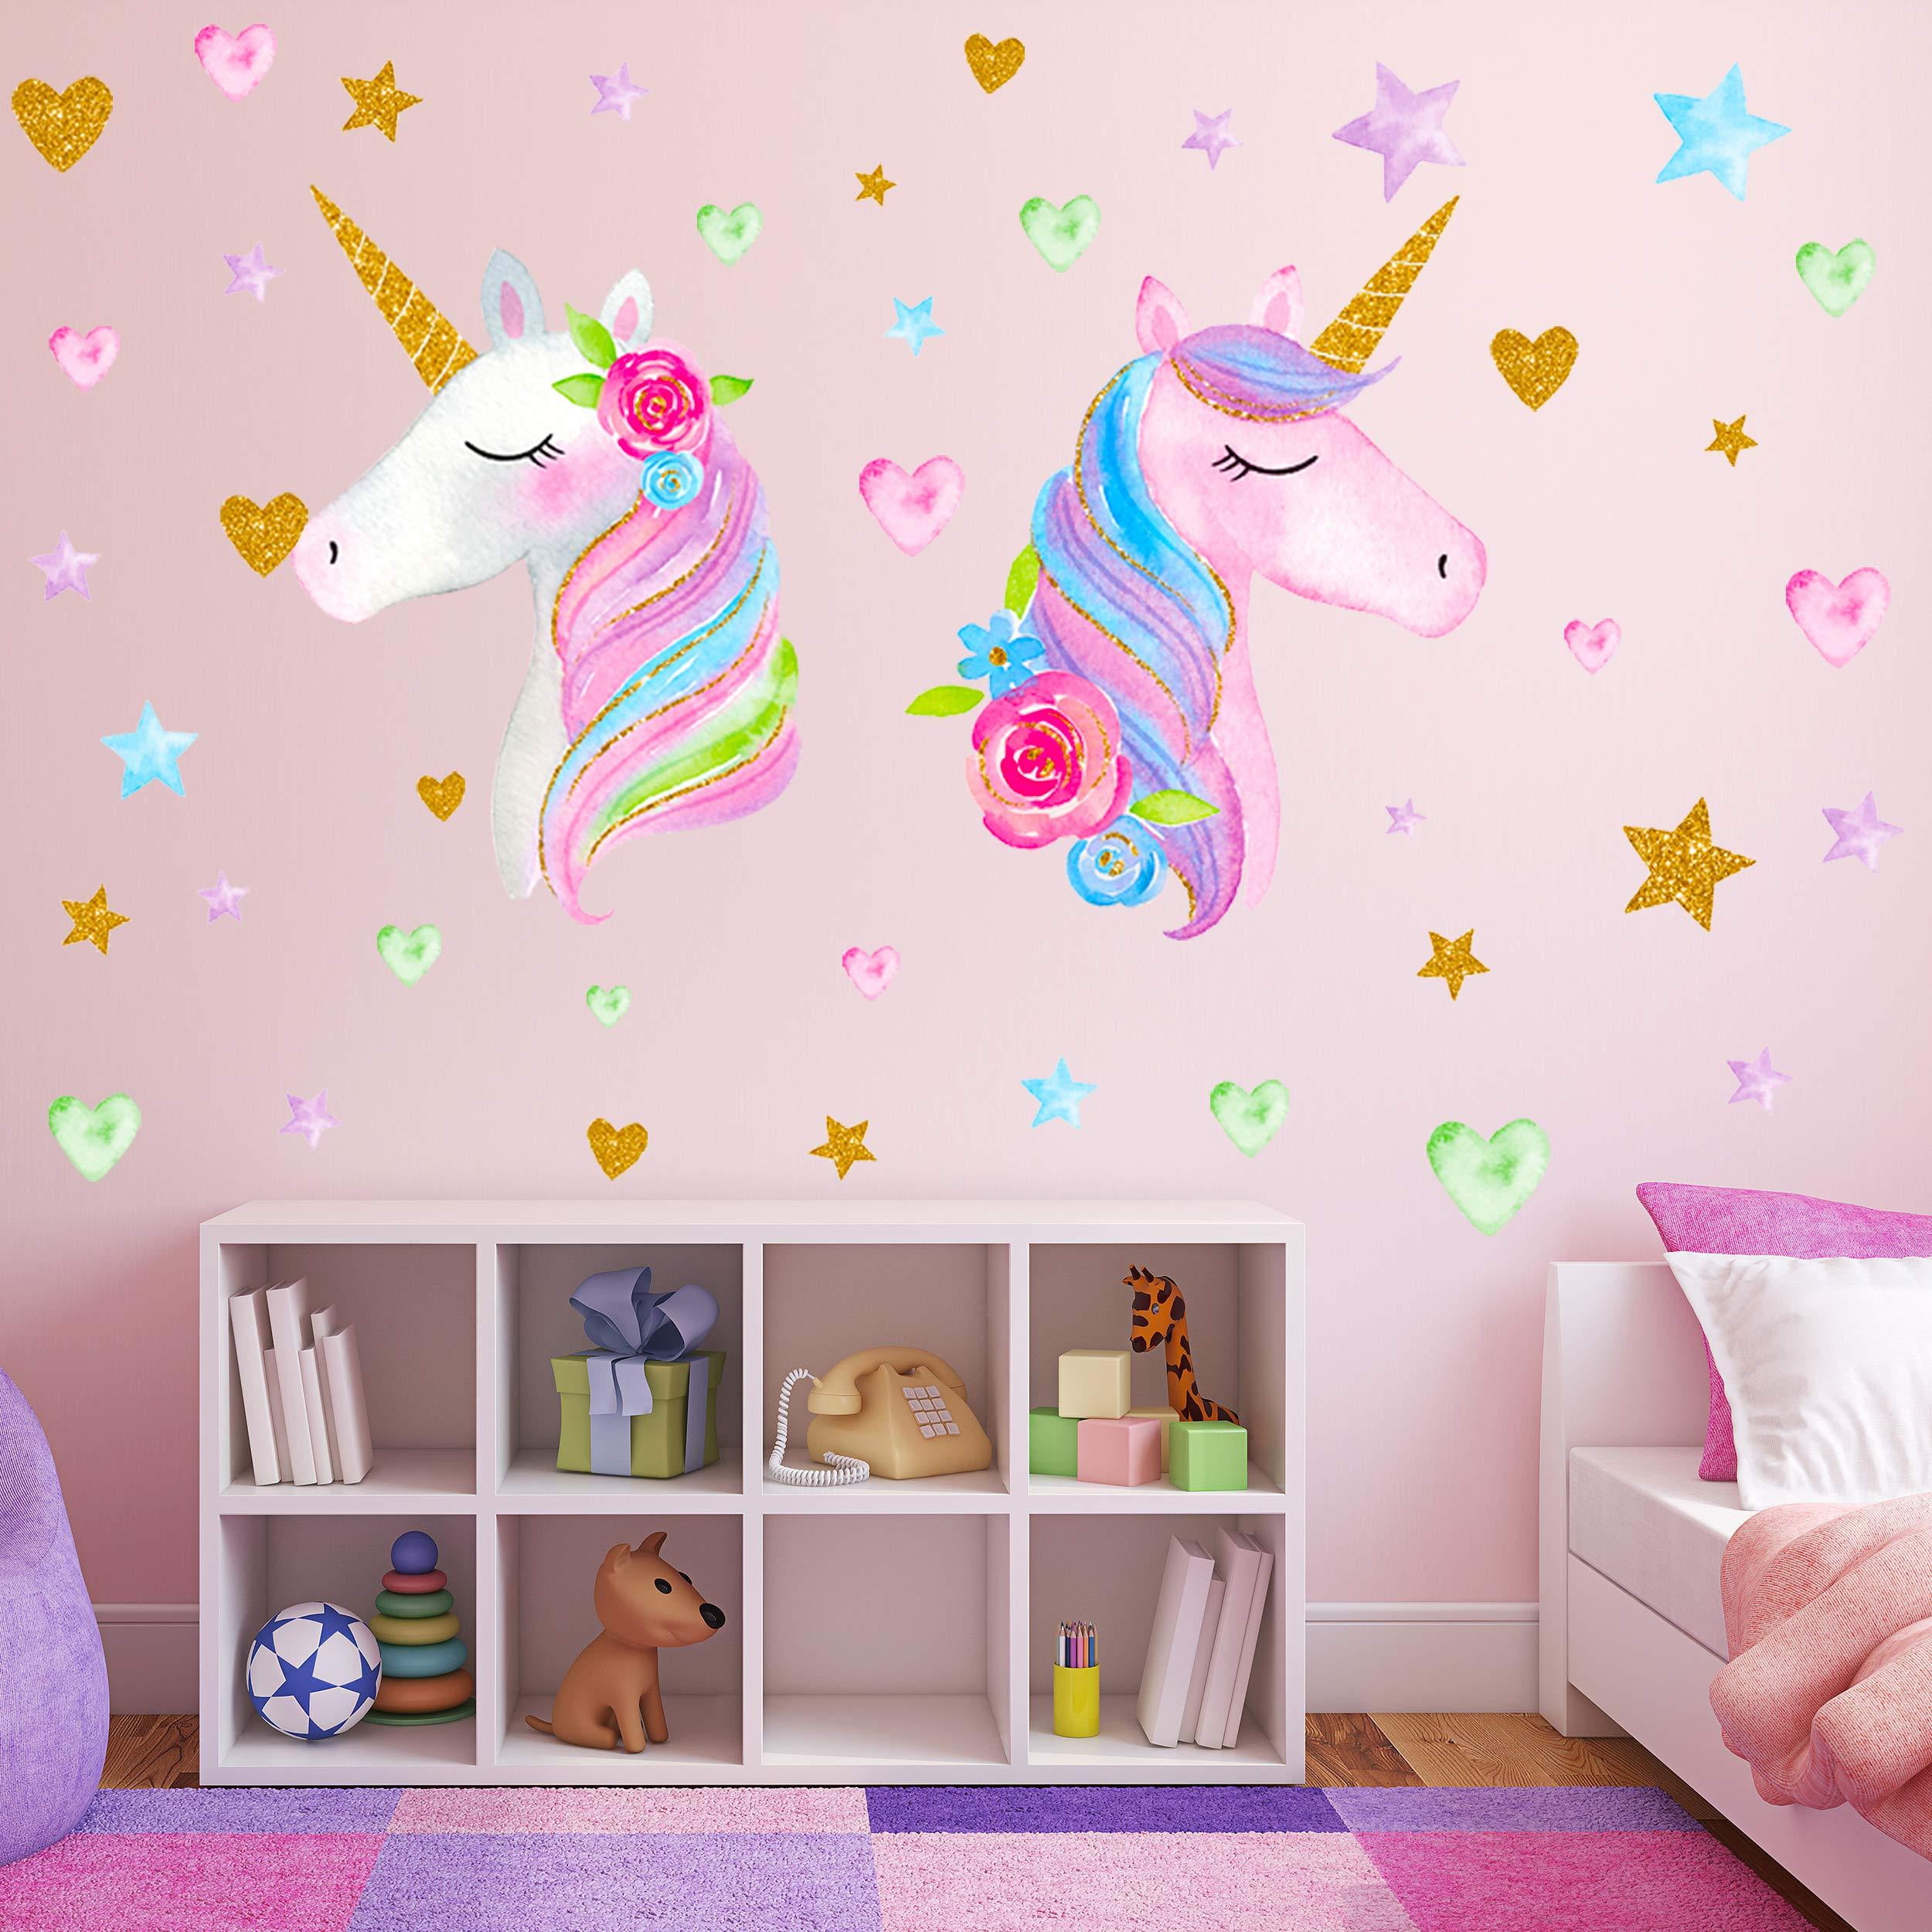 2 Sheets Large Size Unicorn Wall Decor Removable Unicorn Wall Decals Stickers Decor For Gilrs Kids Bedroom Nursery Birthday Party Favor Neasyth Store 9 99 2 Pcs Walmart Com Walmart Com